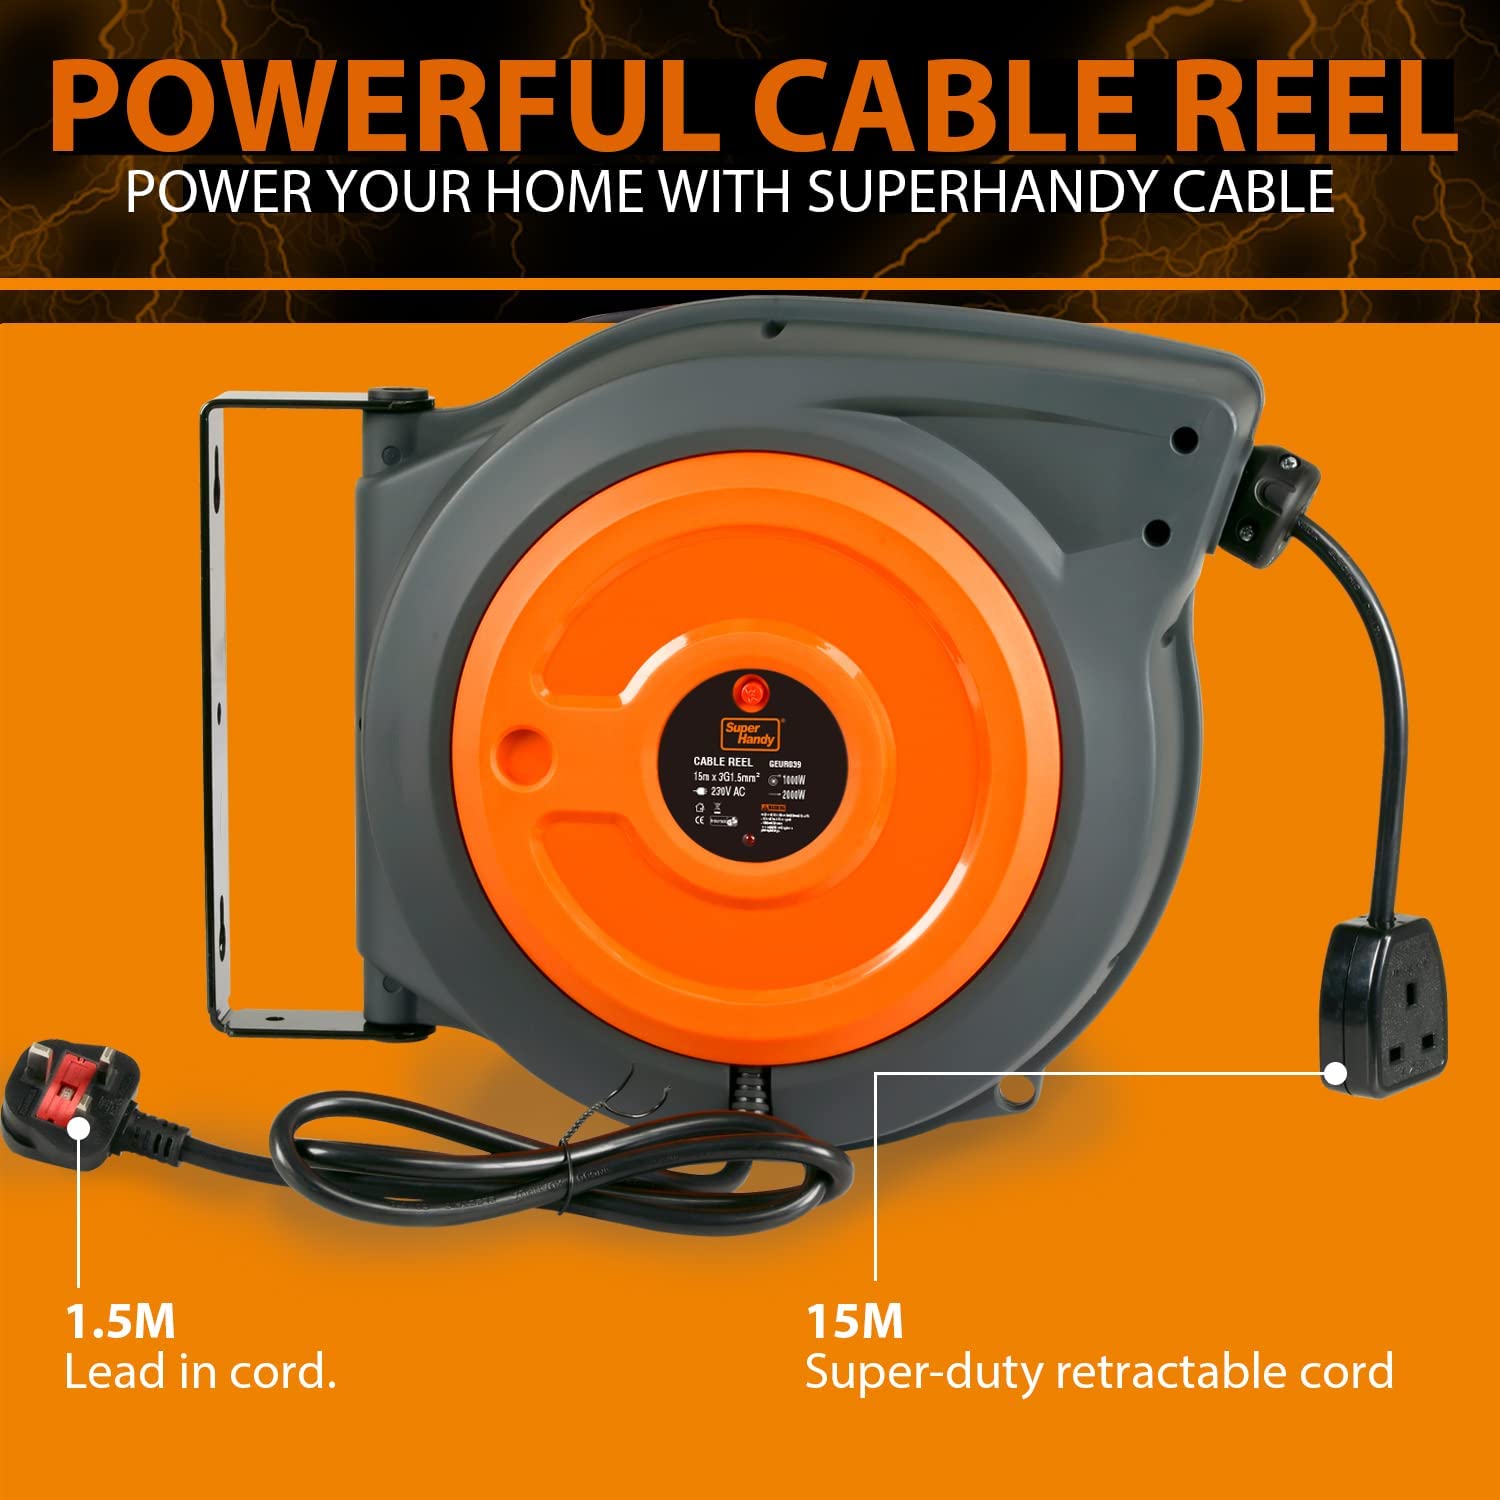 SuperHandy 15m Retractable Extension Cord Reel with Ultra-Flexible Cable for Heavy-Duty Industrial Use